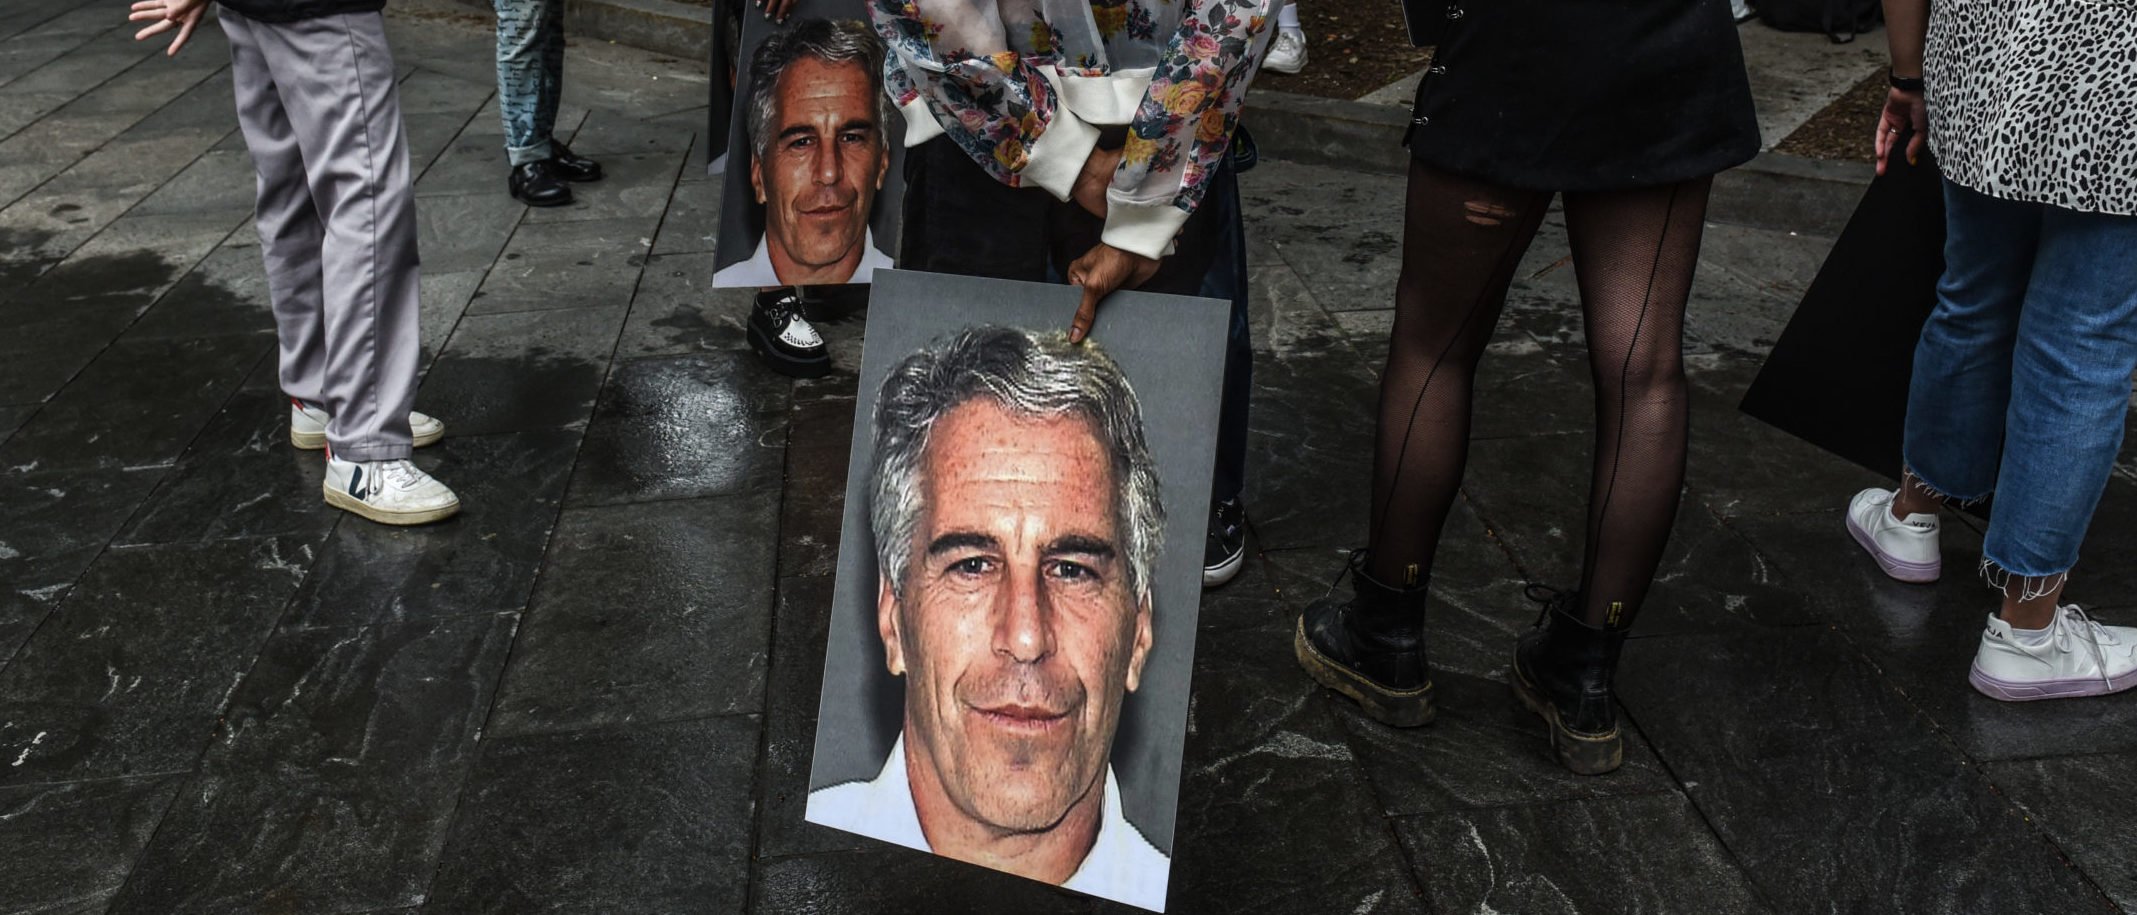 Judge Loretta Preska Orders Epstein Island Images To Be Redacted After Court Accidentally Releases Them